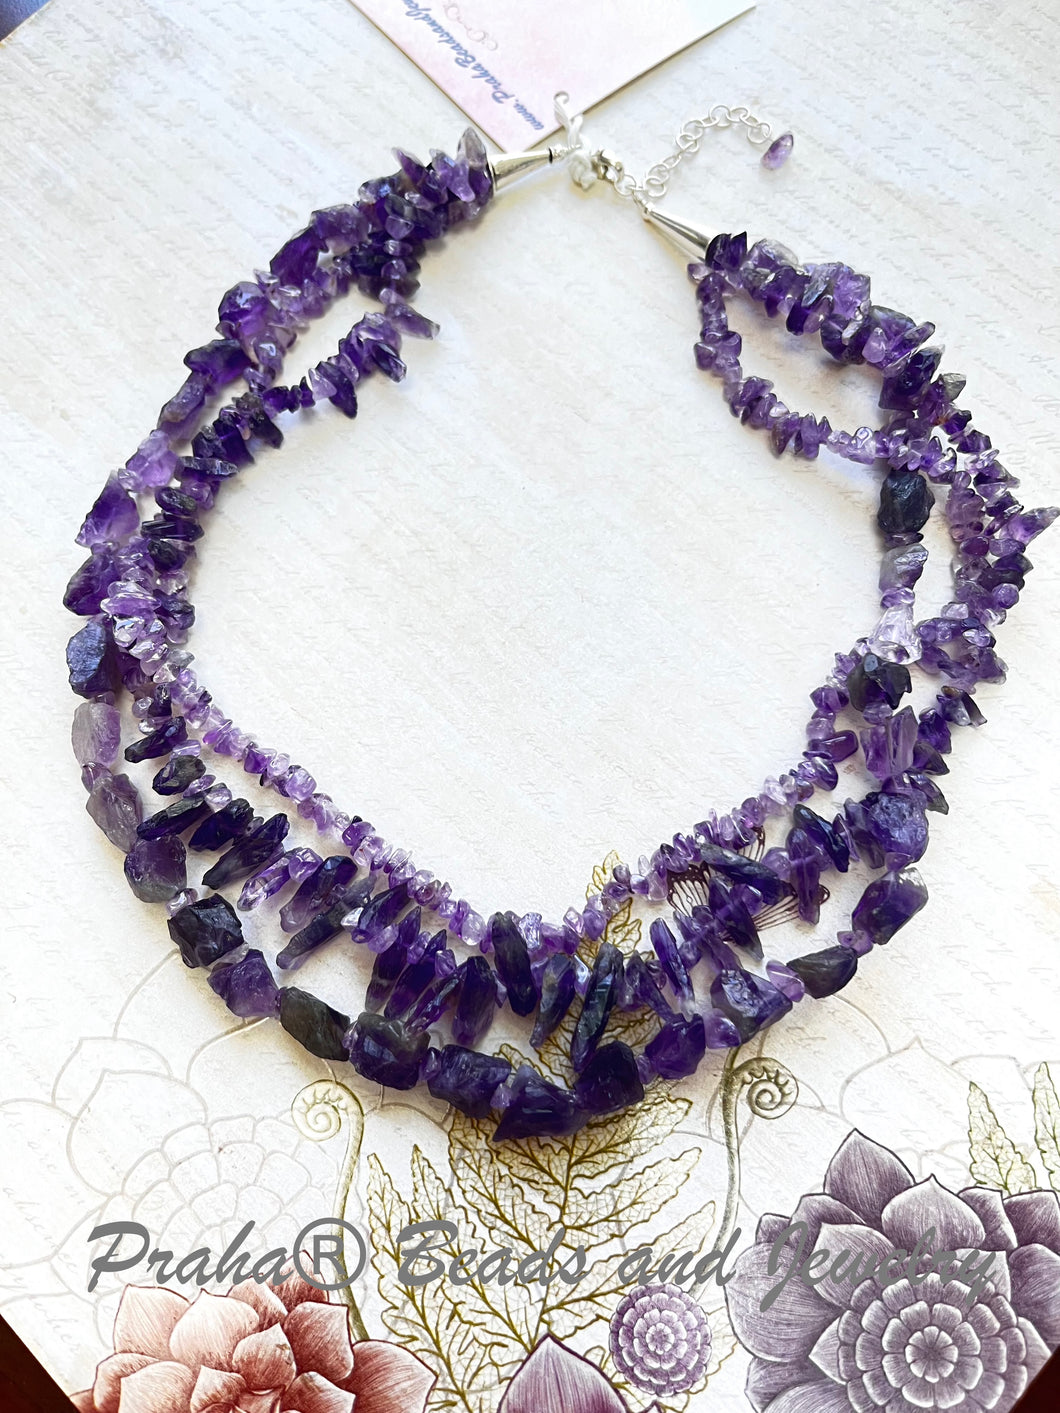 3-Strand Amethyst Necklace, in Sterling Silver